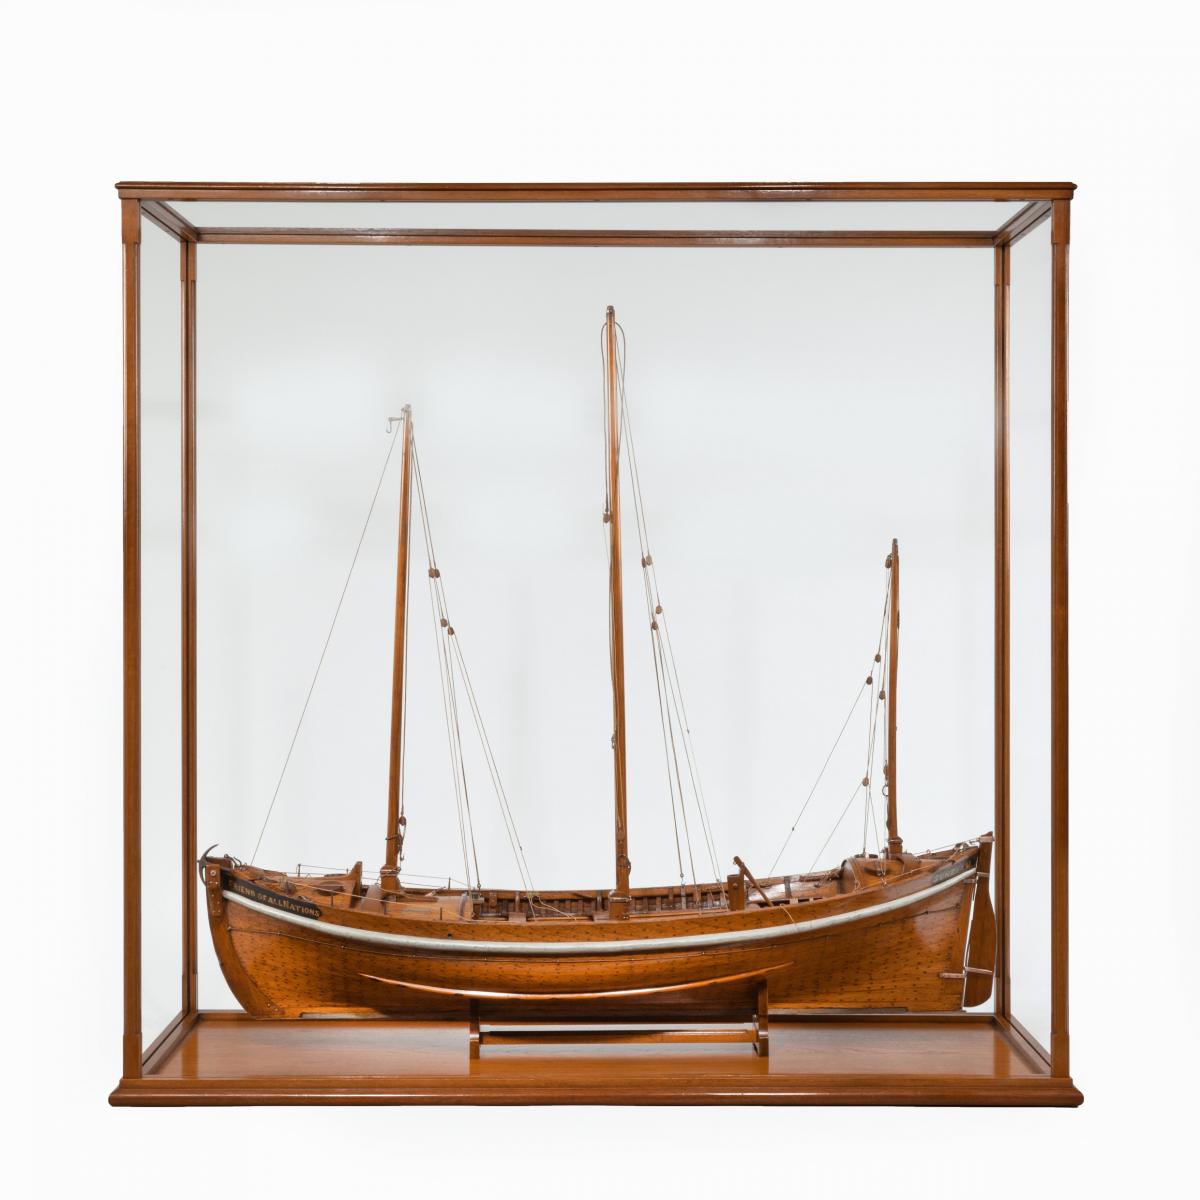 A Lugger lifeboat model by Twyman for the International Exhibition, London 1862